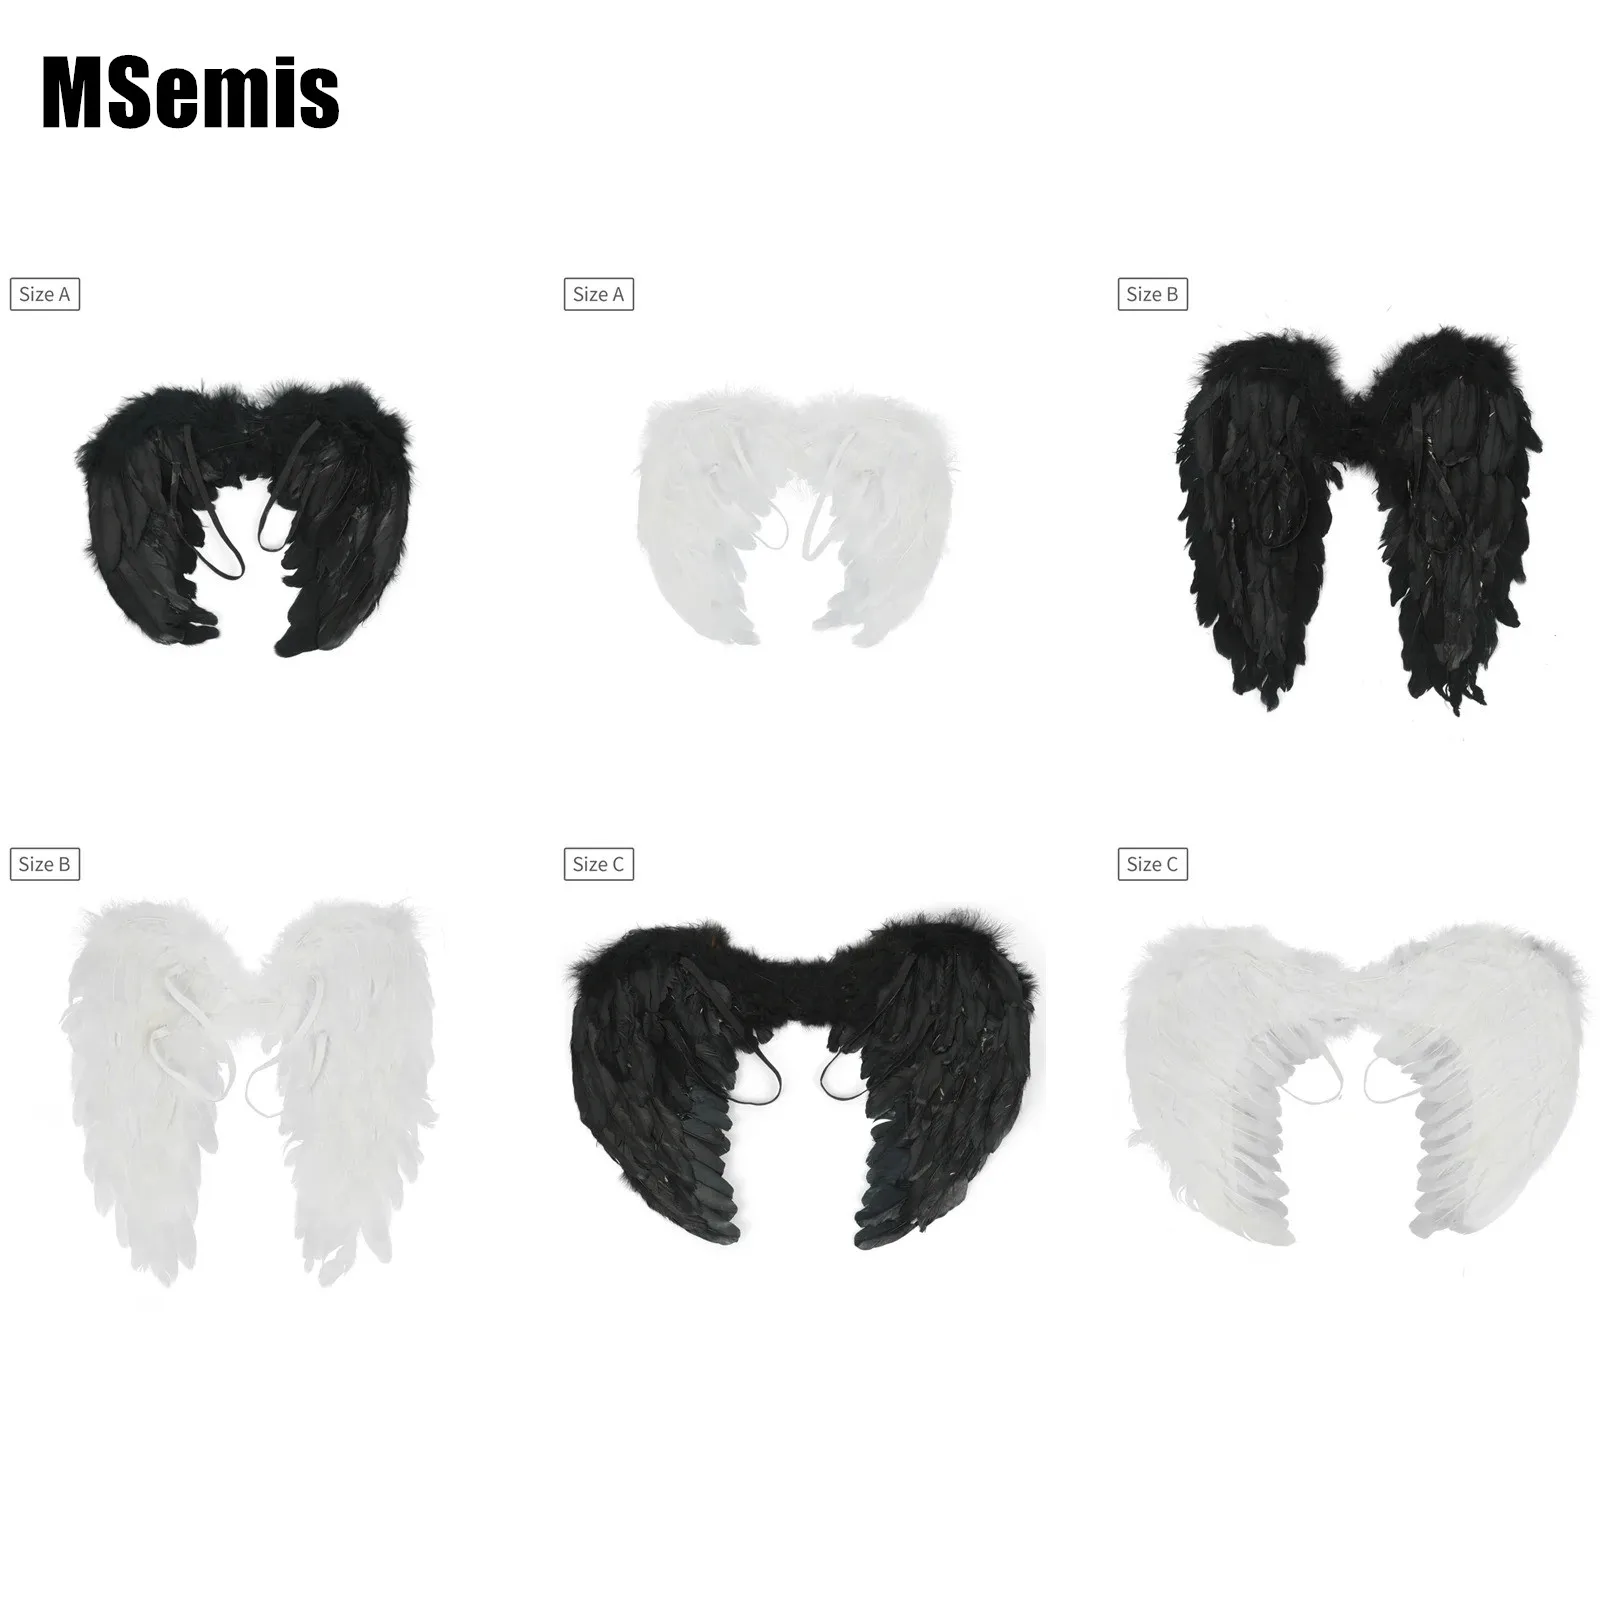 Adult Children Feather Angel Wings Elastic Band Solid Color for Halloween Christmas Cosplay Costume kids children glossy metallic angel wings for photography masquerade halloween unicorn cosplay party costume accessory wings